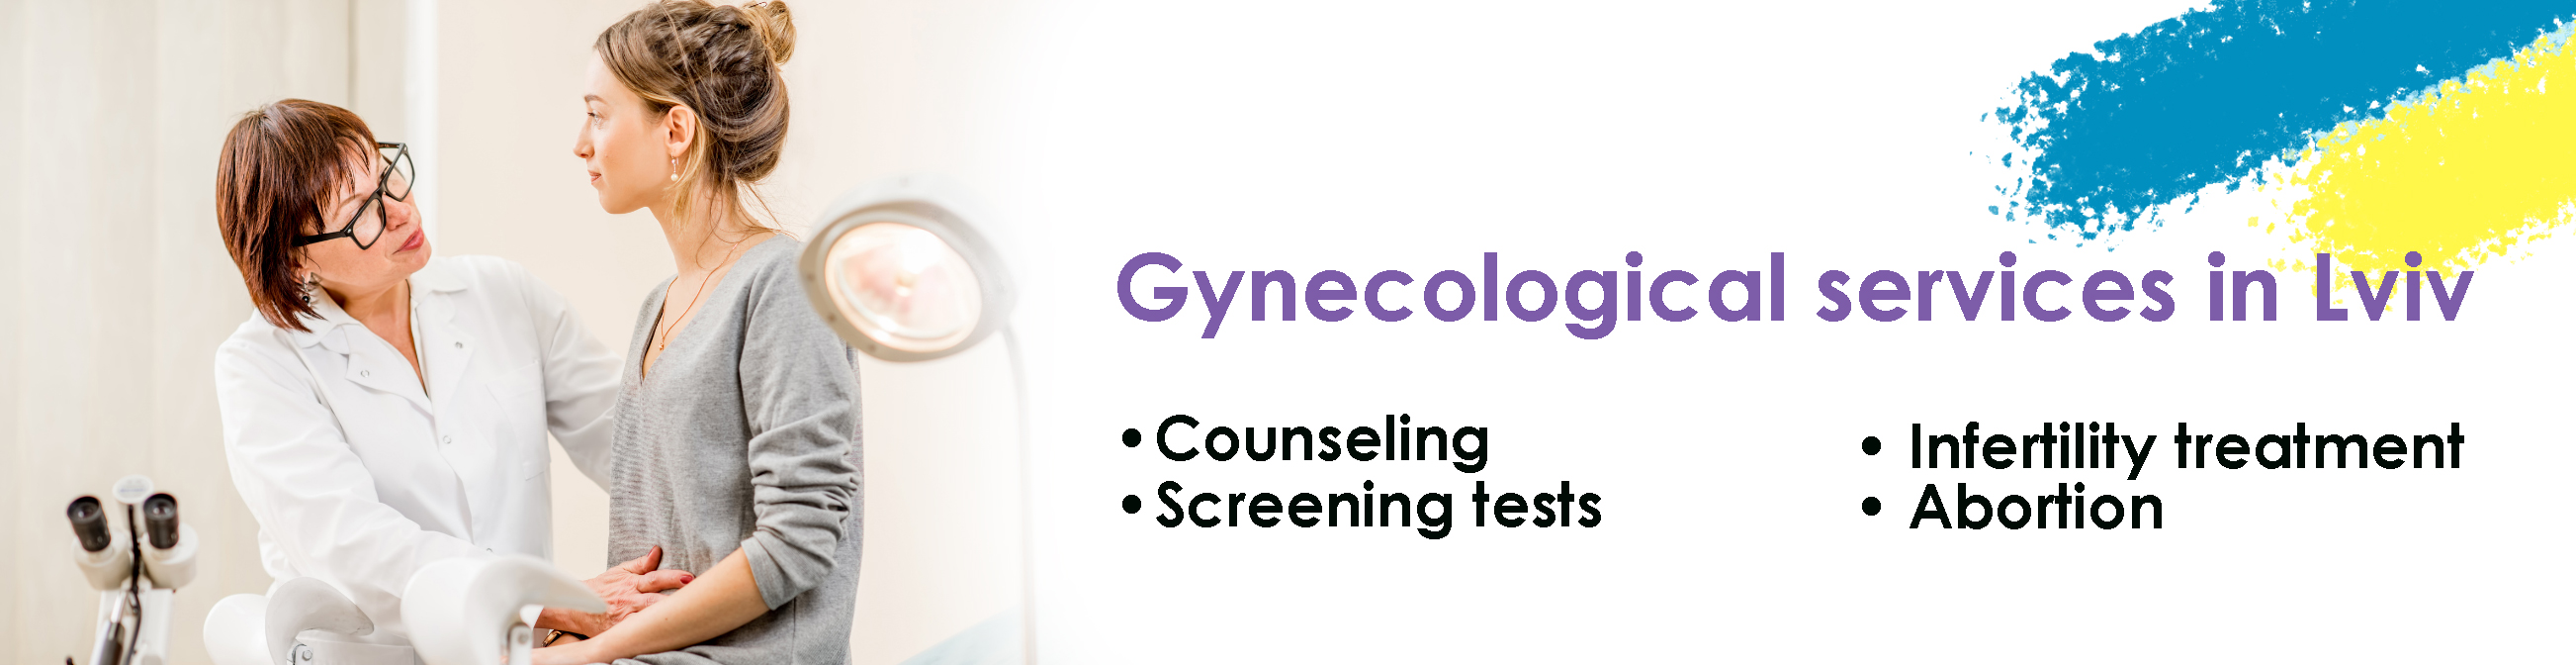 Gynecologist services in Lviv